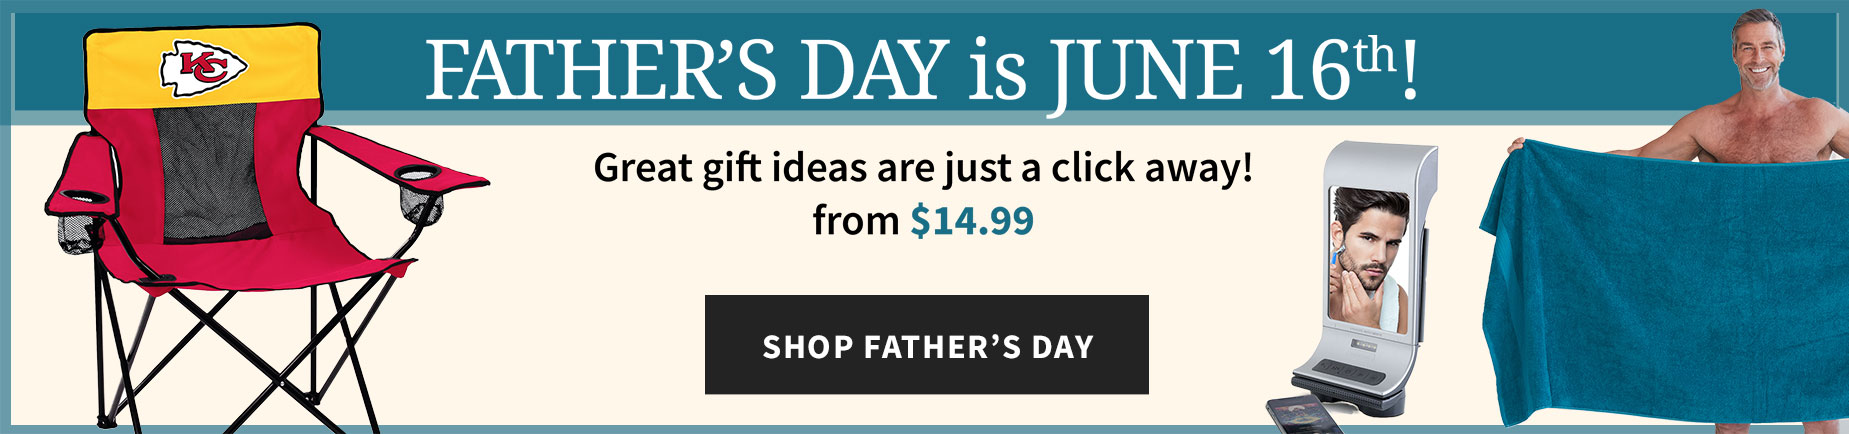 Father's day is june 16th.